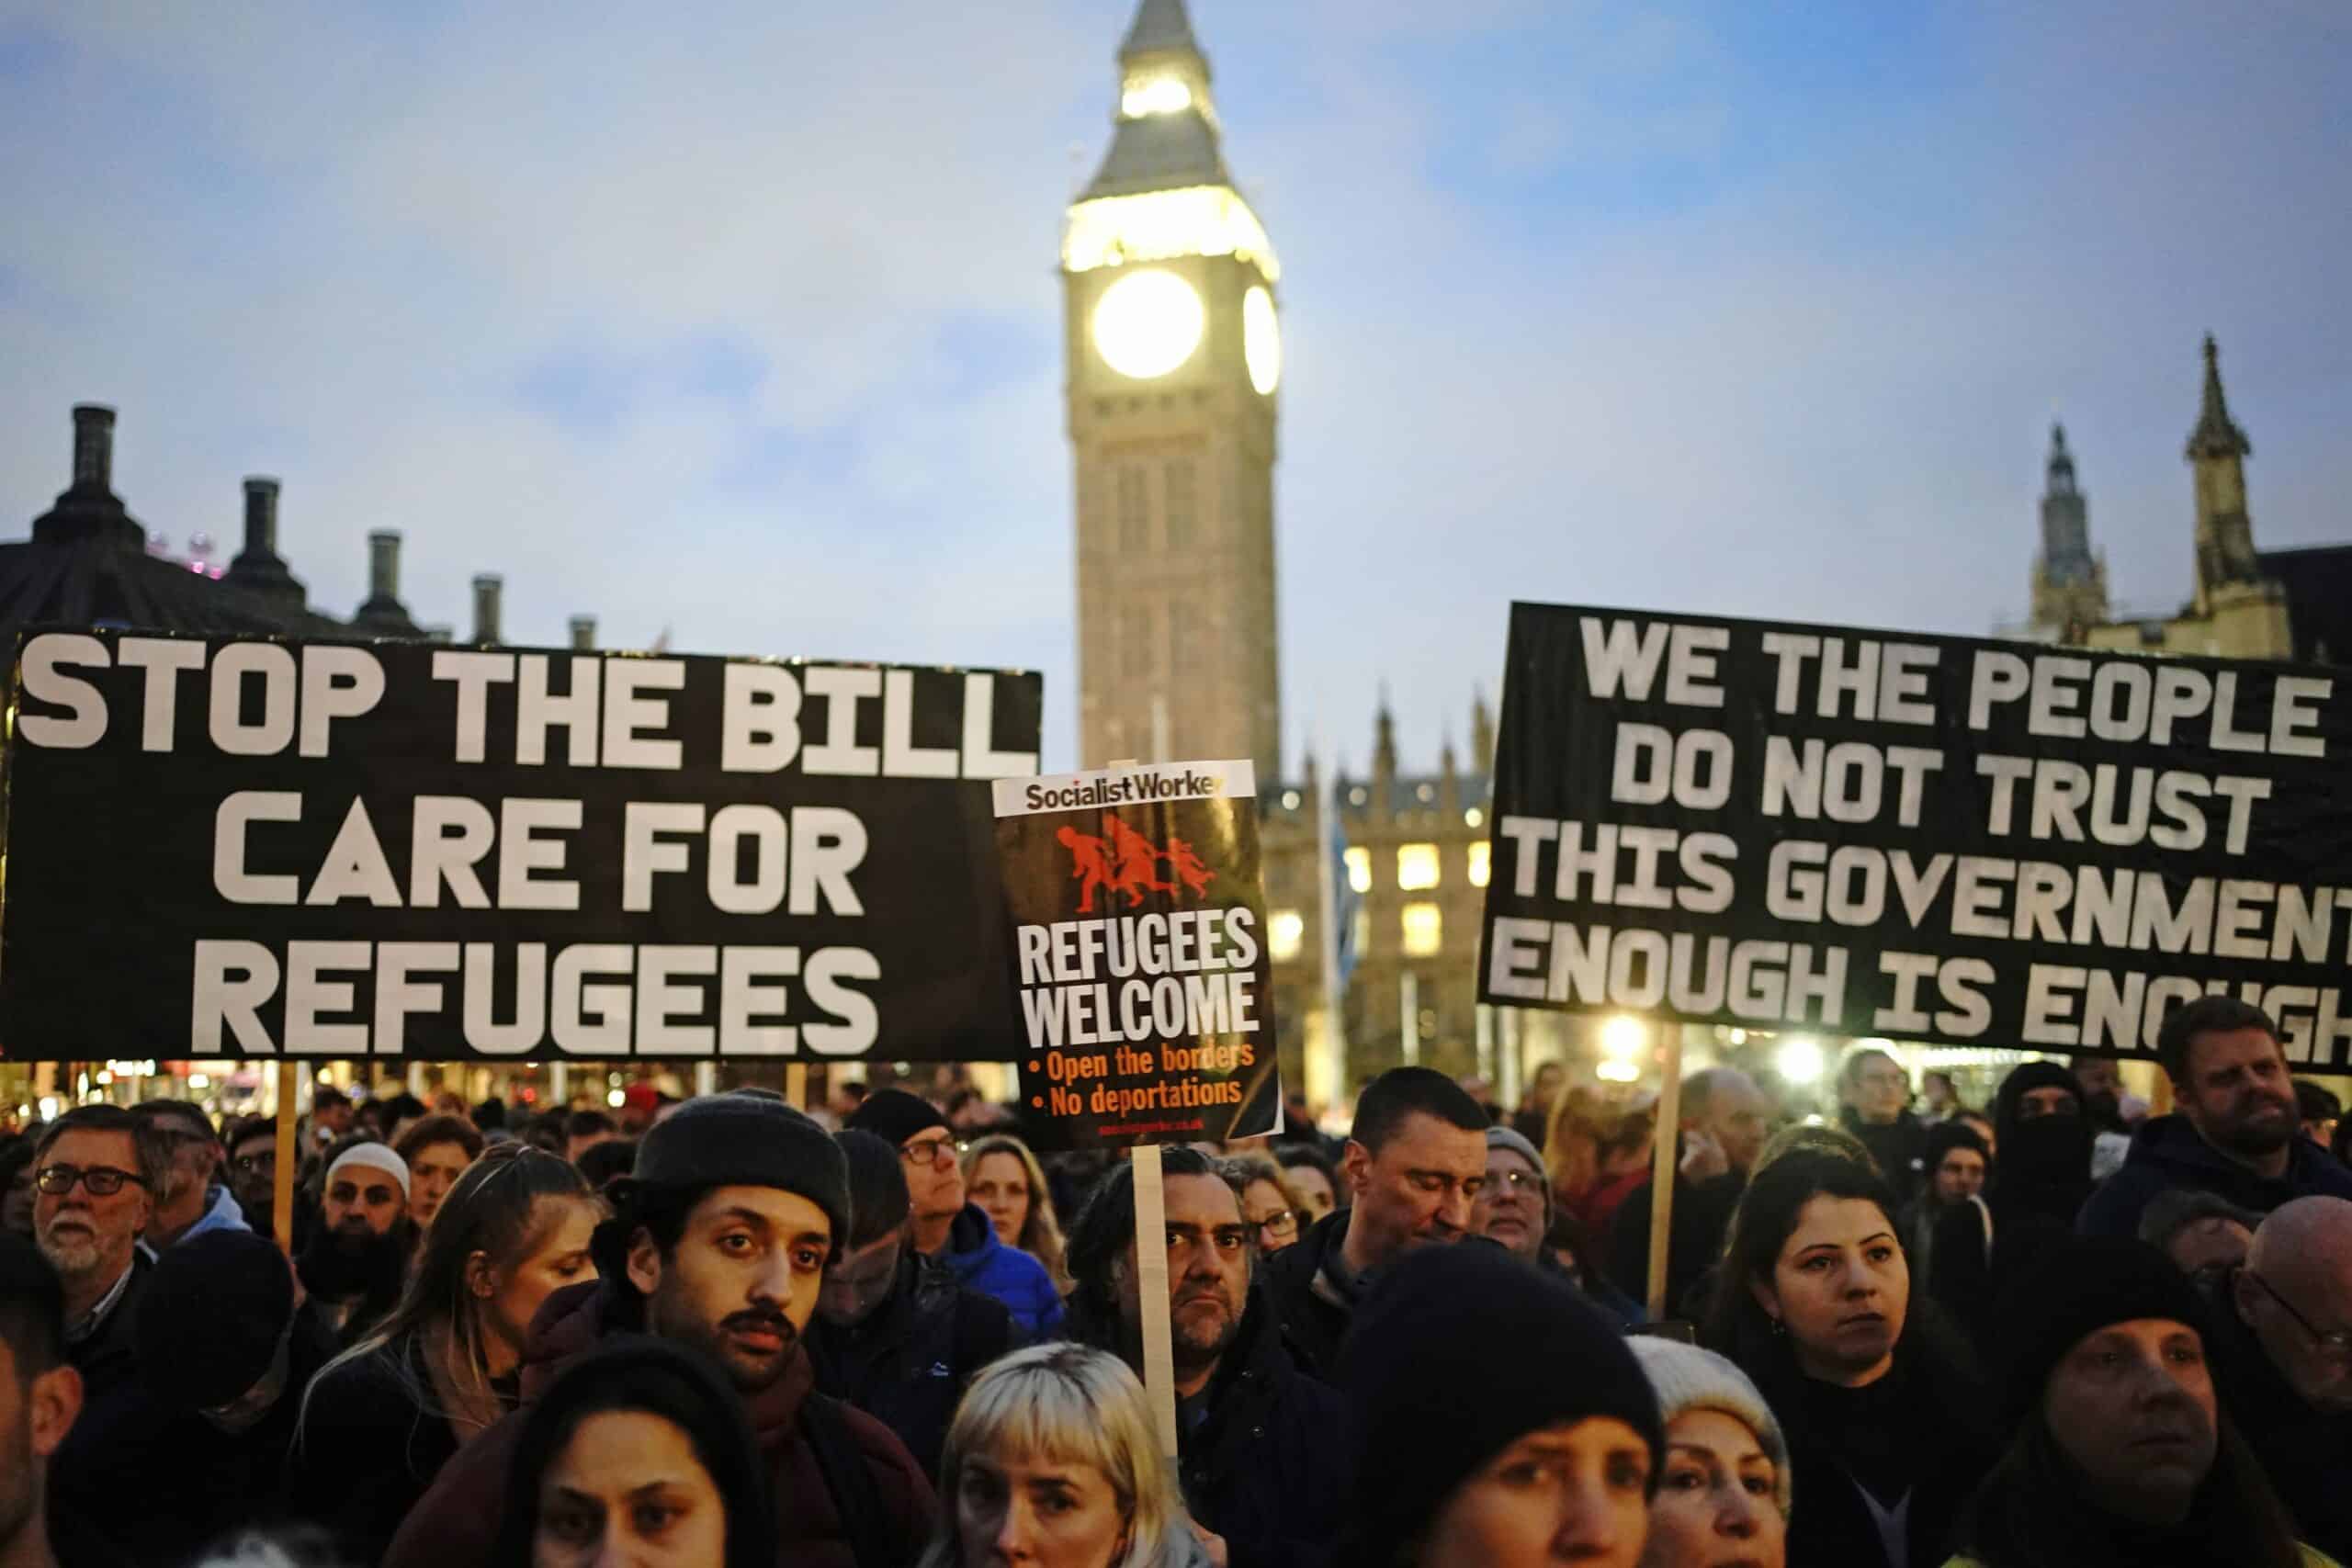 Hundreds gather outside parliament to protest against Migration Bill